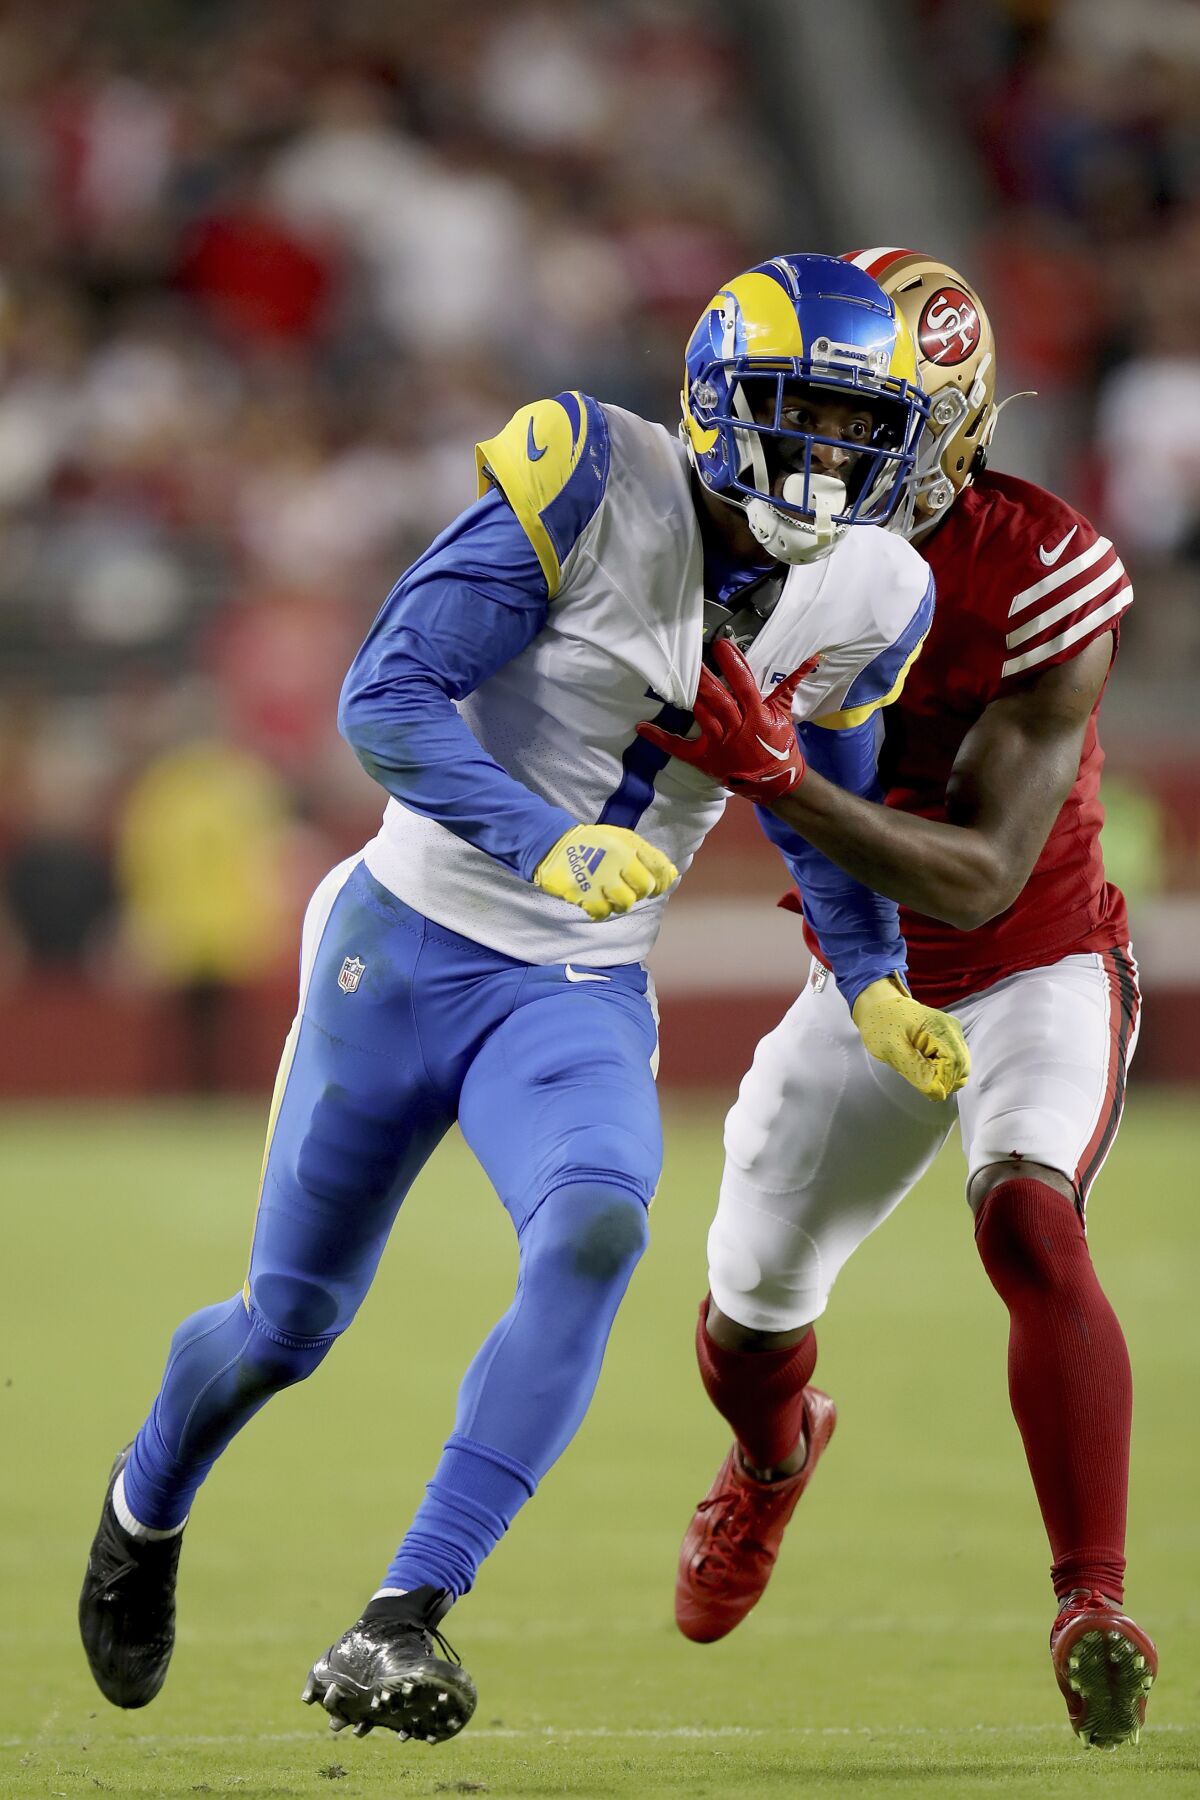 Rams receiver Allen Robinson II tackles 49ers cornerback Charvarius Ward while running a pass route.